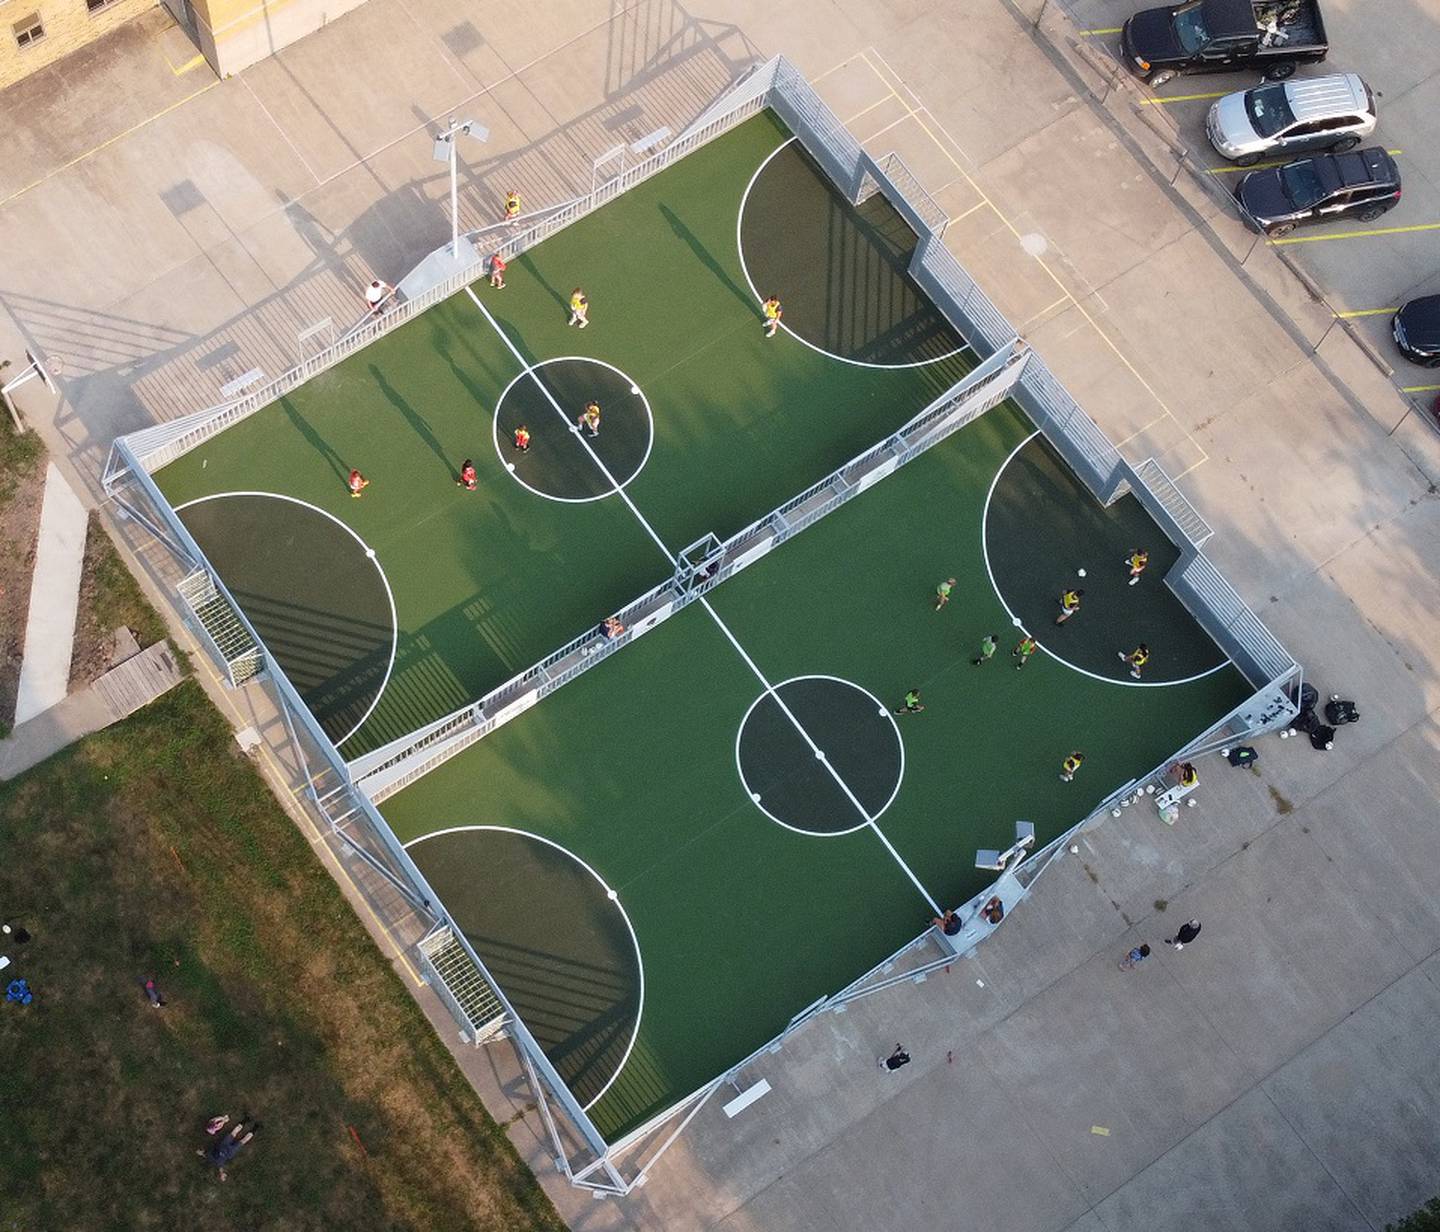 The mini-pitch in Lamoni shows what a largeer facility could look like. Soccer enthusiasts in Newton are proposing to fully fund a mini-pitch with donations and grants so long as the city council can secure the basketball court space in Maytag Park to use as the base.